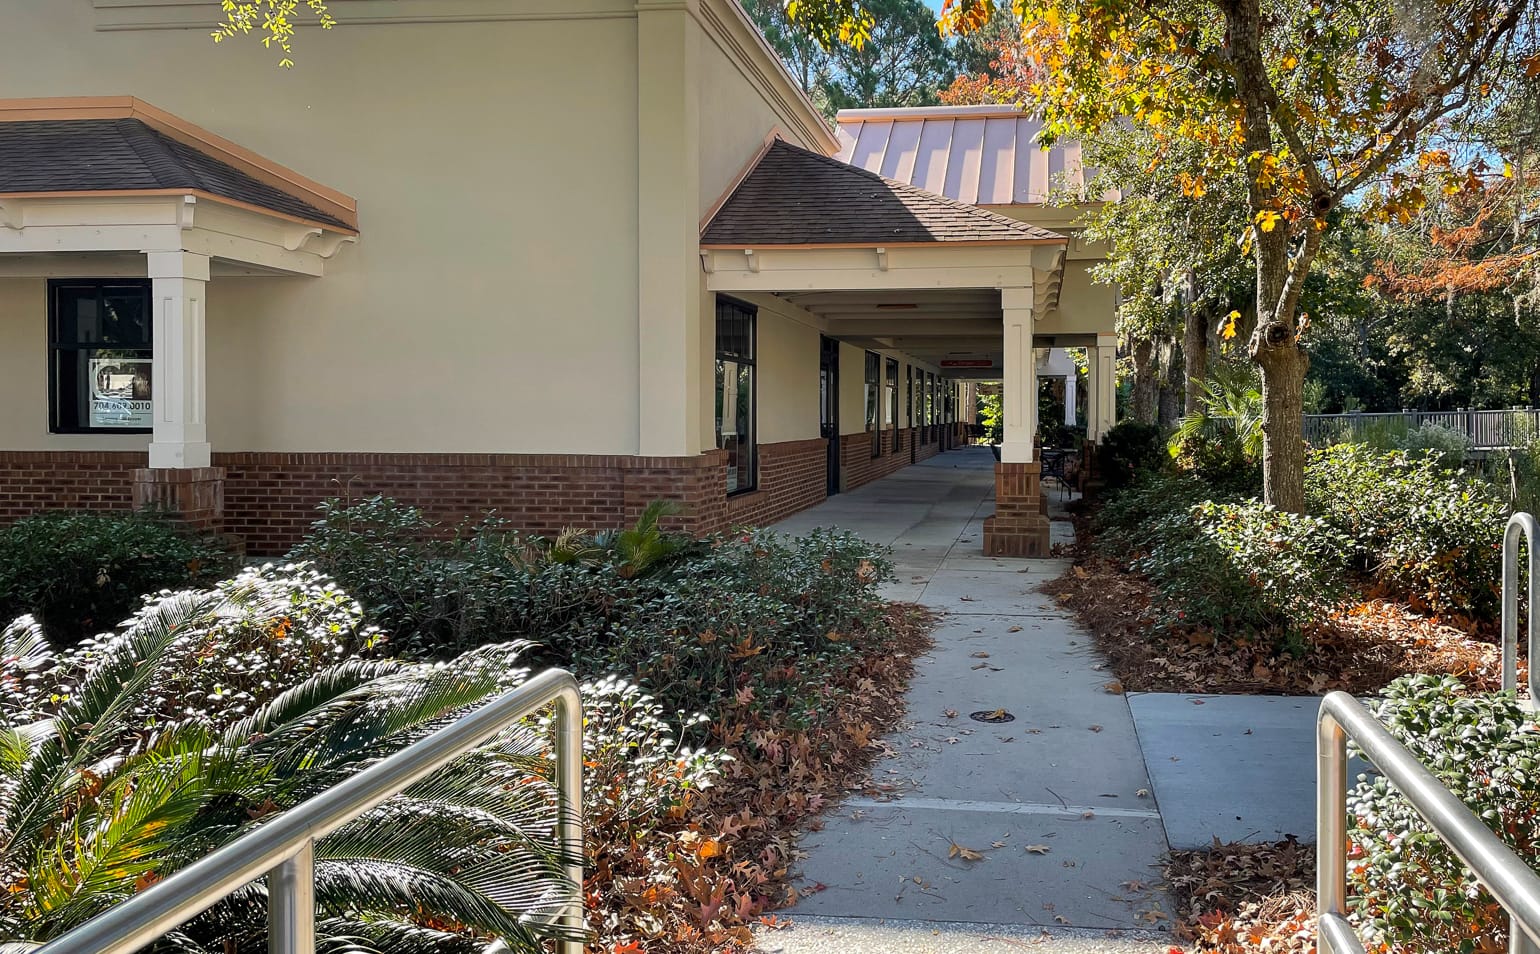 BenchMark Physical Therapy Institute Hilton Head Island SC Sea Pines 